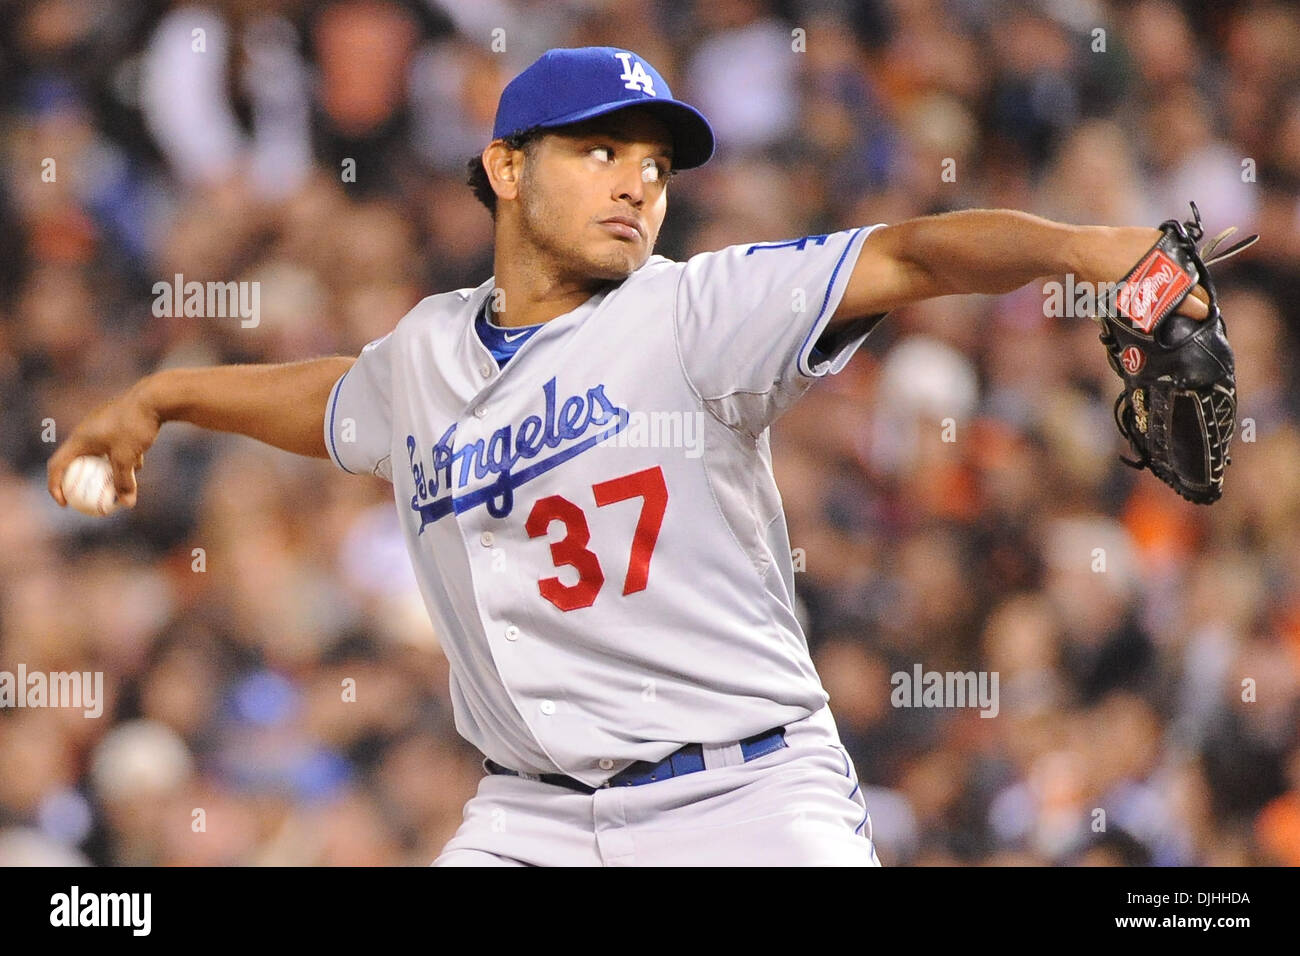 San Francisco, CA: The Los Angeles Dodgers starting pitcher Carlos Monasterios (37) pitches the ball. The San Francisco Giants won the game 6-5. (Credit Image: © Charles Herskowitz/Southcreek Global/ZUMApress.com) Stock Photo